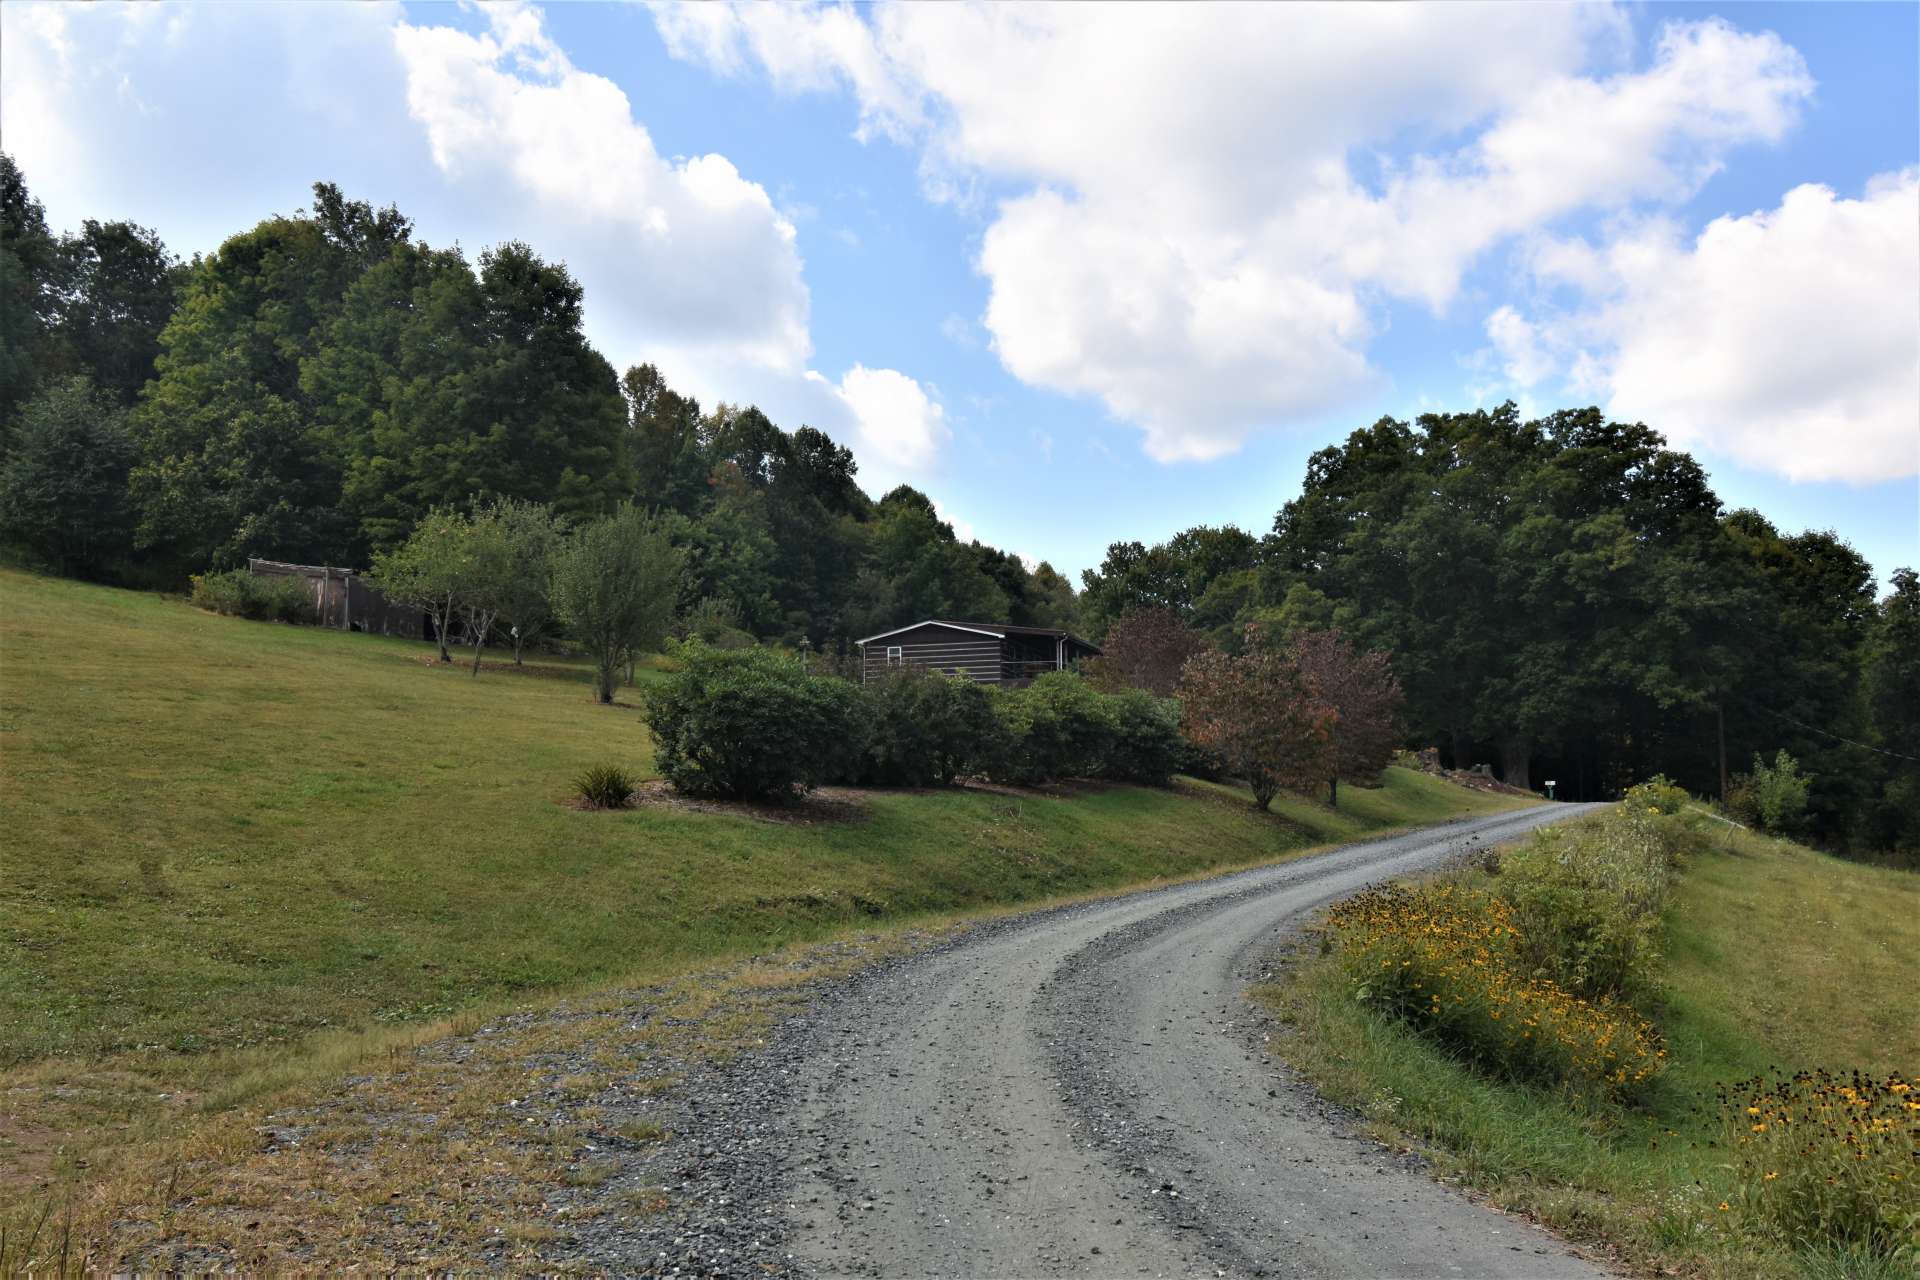 Accessed via a graveled driveway off of Peak Road in the Creston area of Ashe County, this home is convenient to both West Jefferson and the Boone area.